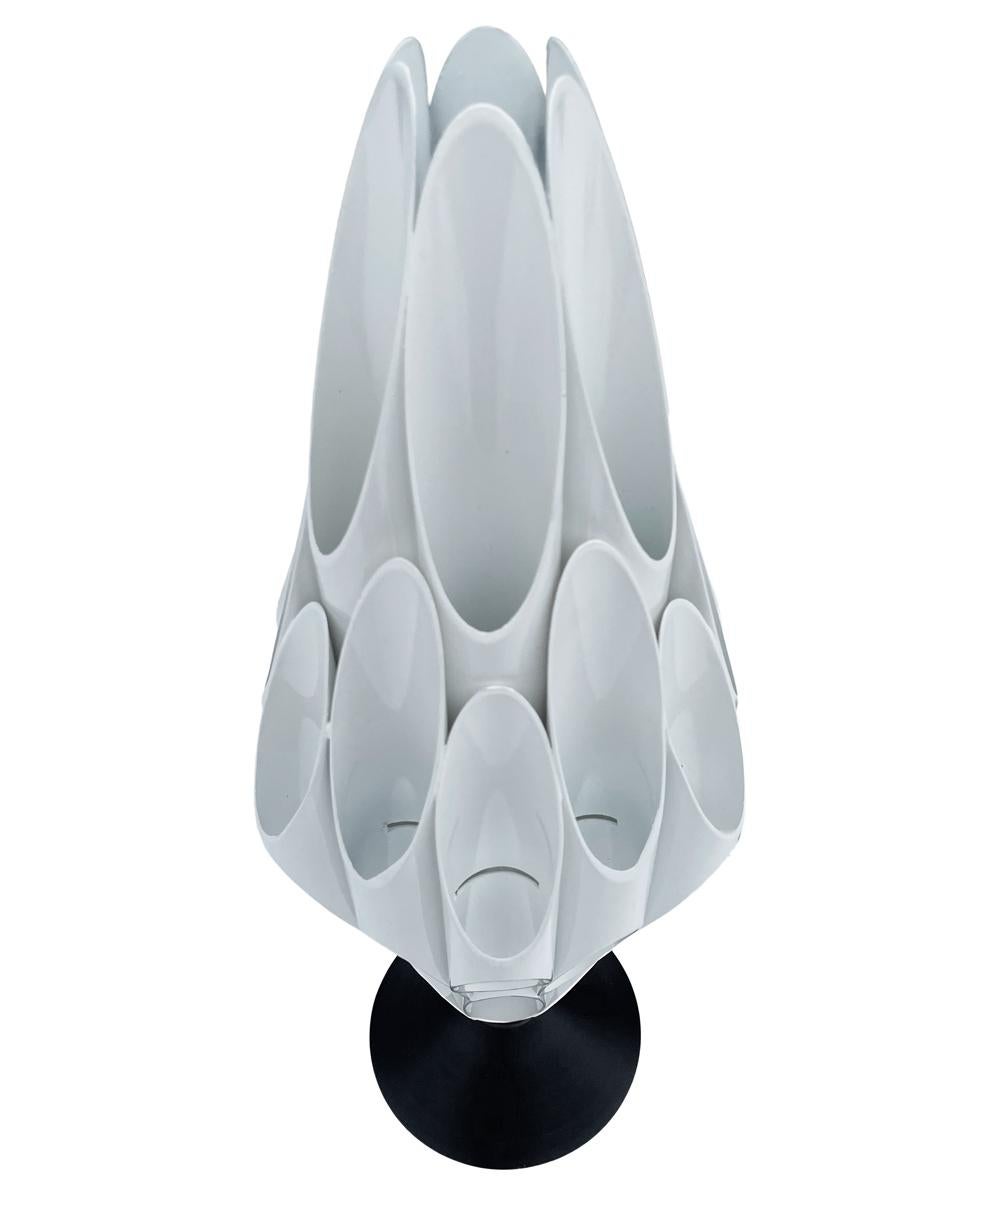 Pair of Space Age Post Modern Table Lamps in Black & White After Rougier For Sale 2